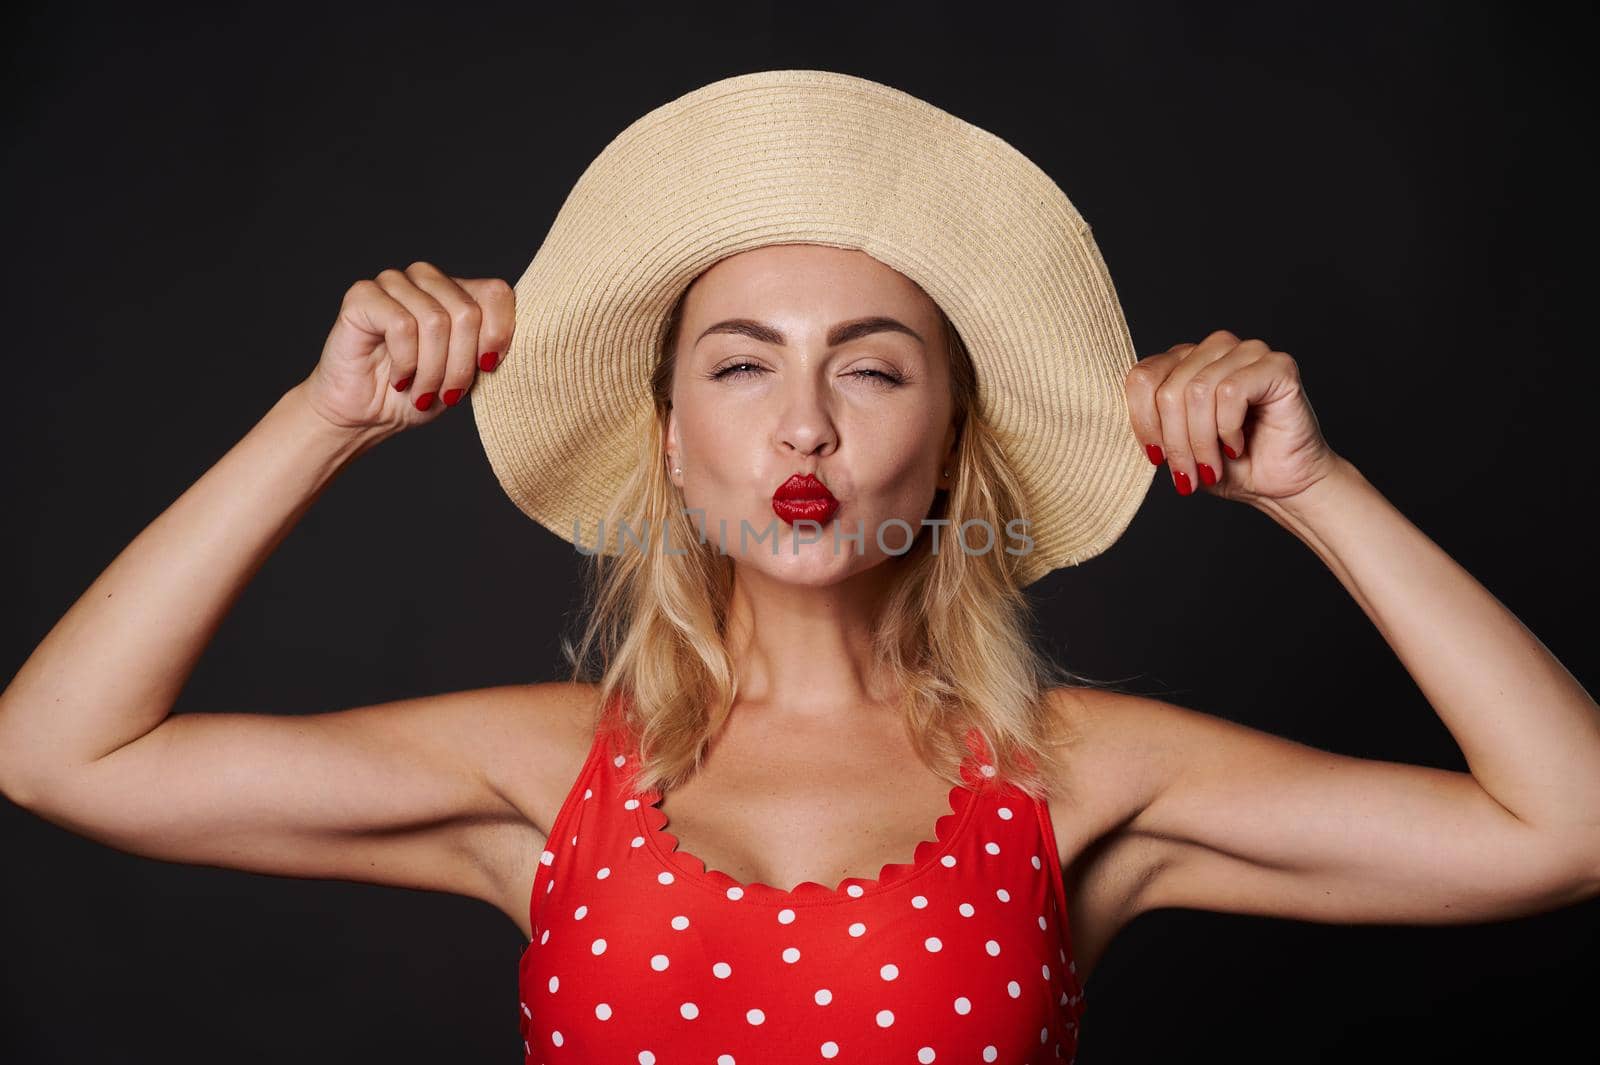 Close-up portrait of a beautiful sexy delightful stunning blonde European woman in red swimsuit with white polka dots and a straw summer hat sending a kiss, against black background with copy space by artgf